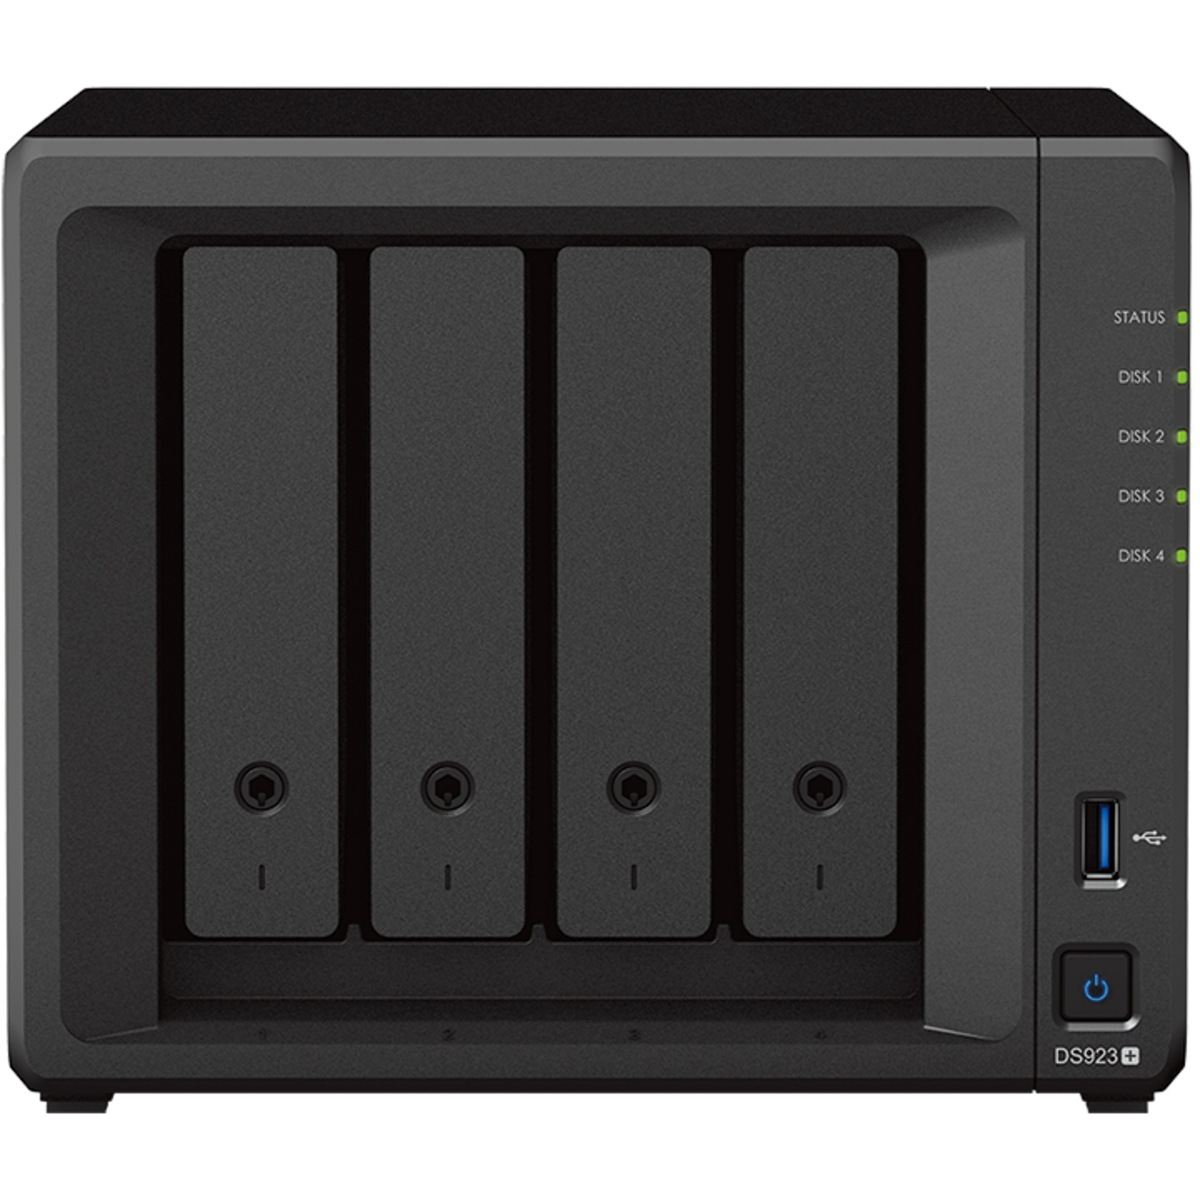 Synology DiskStation DS923+ 40tb 4-Bay Desktop Multimedia / Power User / Business NAS - Network Attached Storage Device 4x10tb Western Digital Red Pro WD102KFBX 3.5 7200rpm SATA 6Gb/s HDD NAS Class Drives Installed - Burn-In Tested - ON SALE - FREE RAM UPGRADE DiskStation DS923+